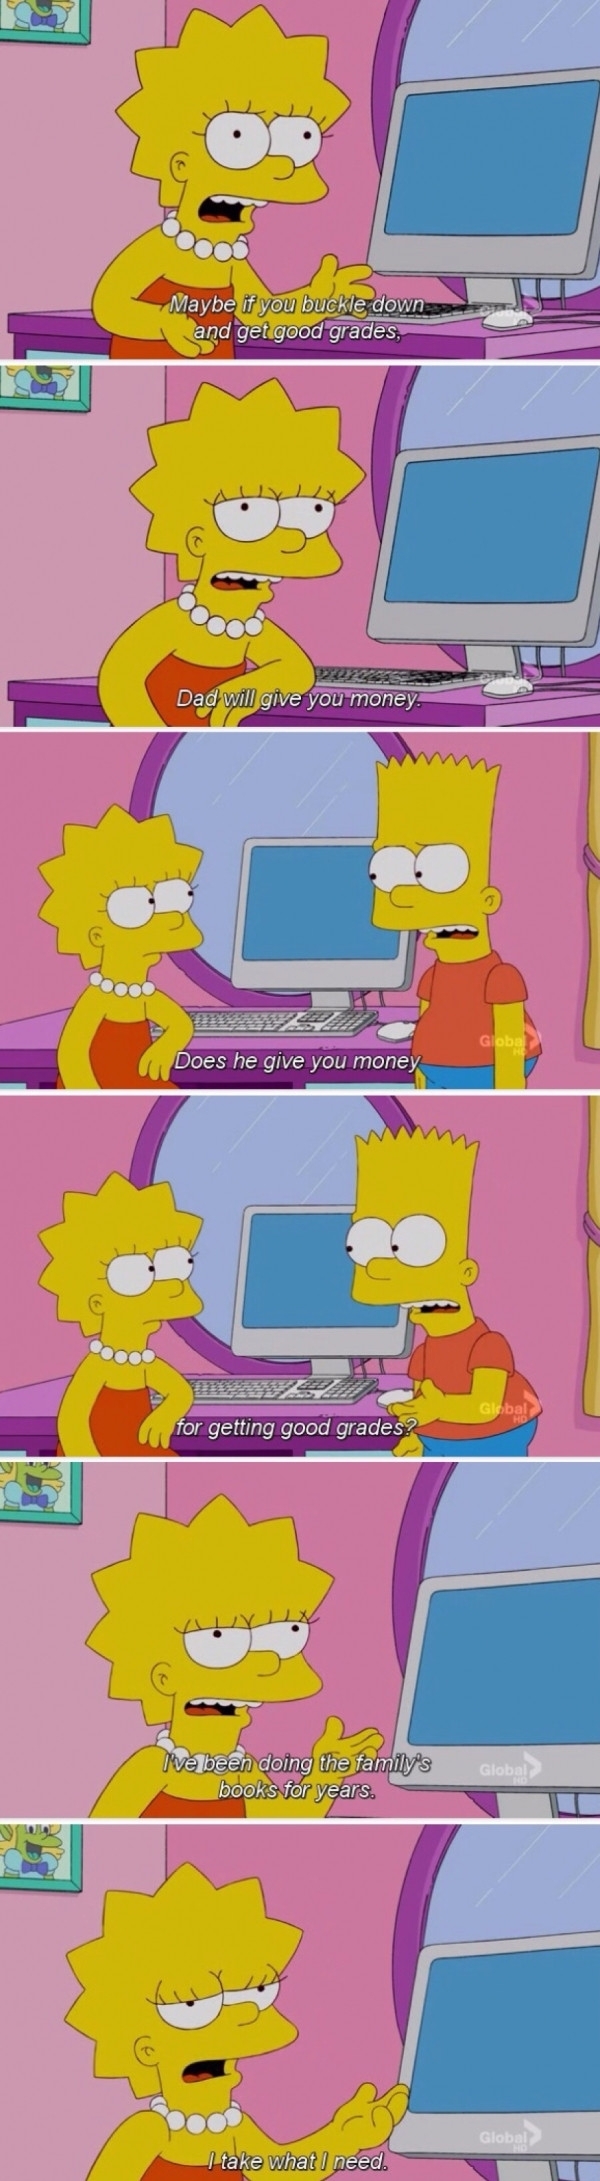 Lisa does what she needs to